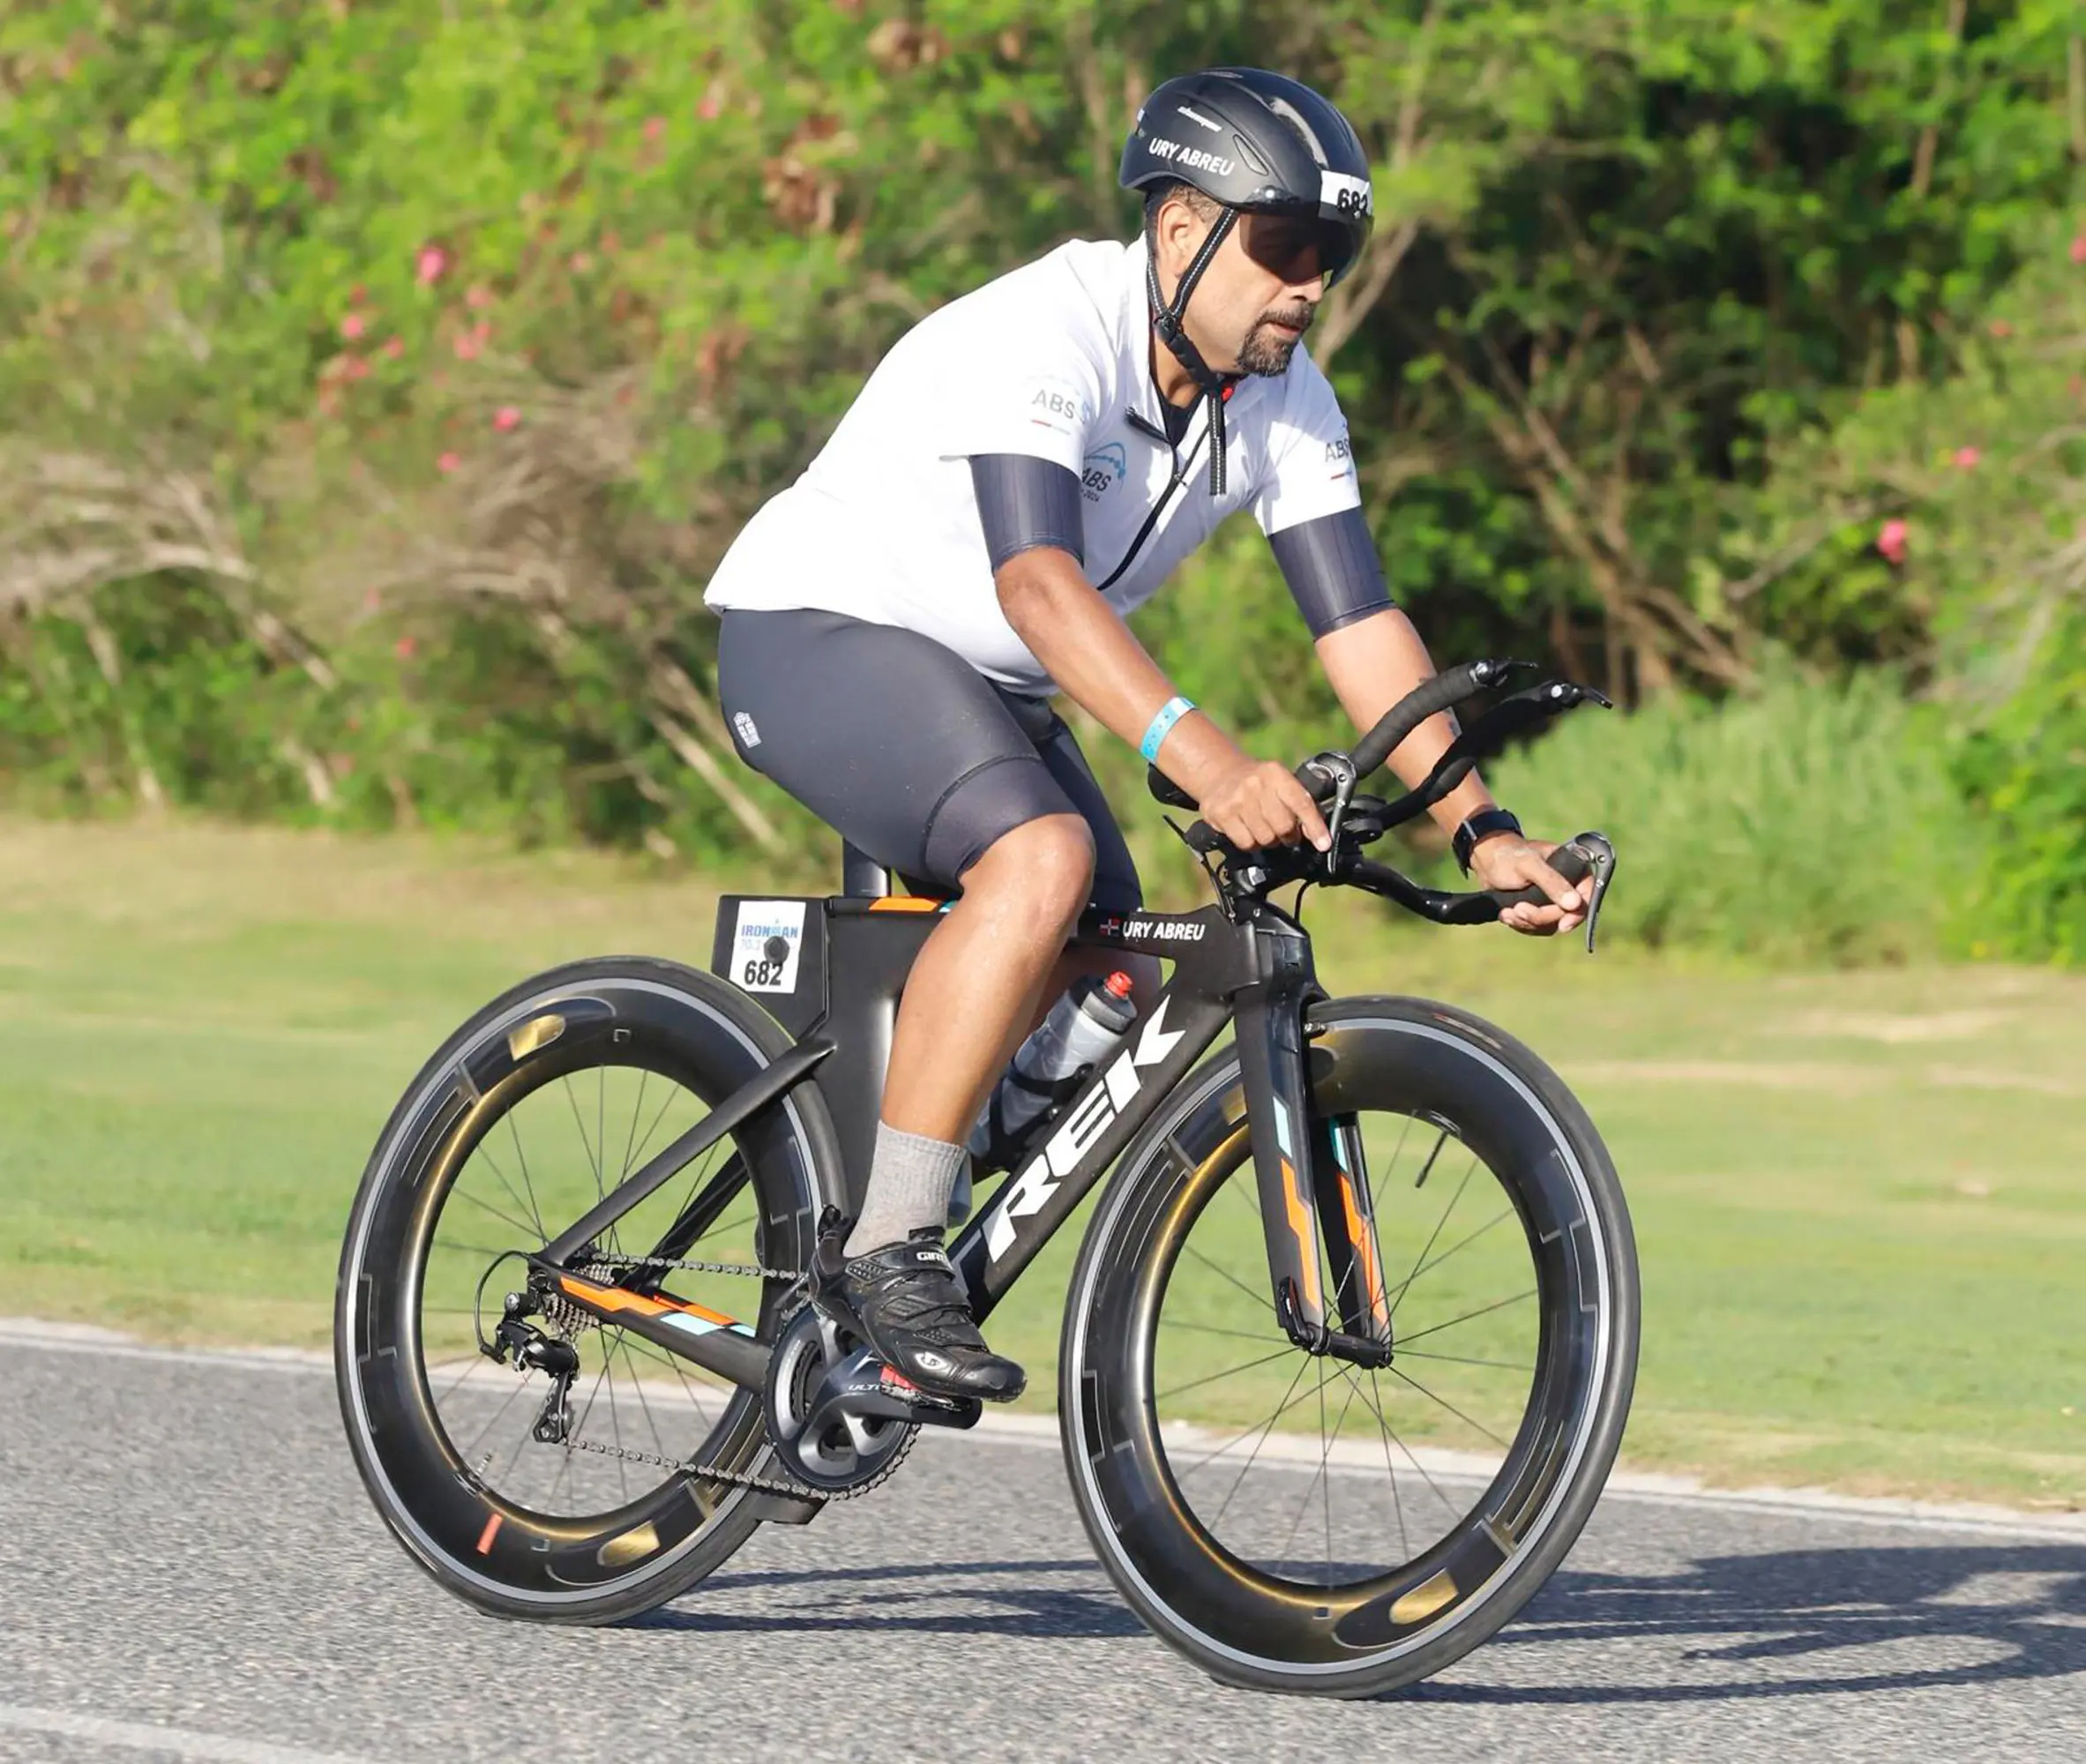 ABS Celebrates Ury Abreu's Remarkable Achievement: Completing the Ironman 70.3